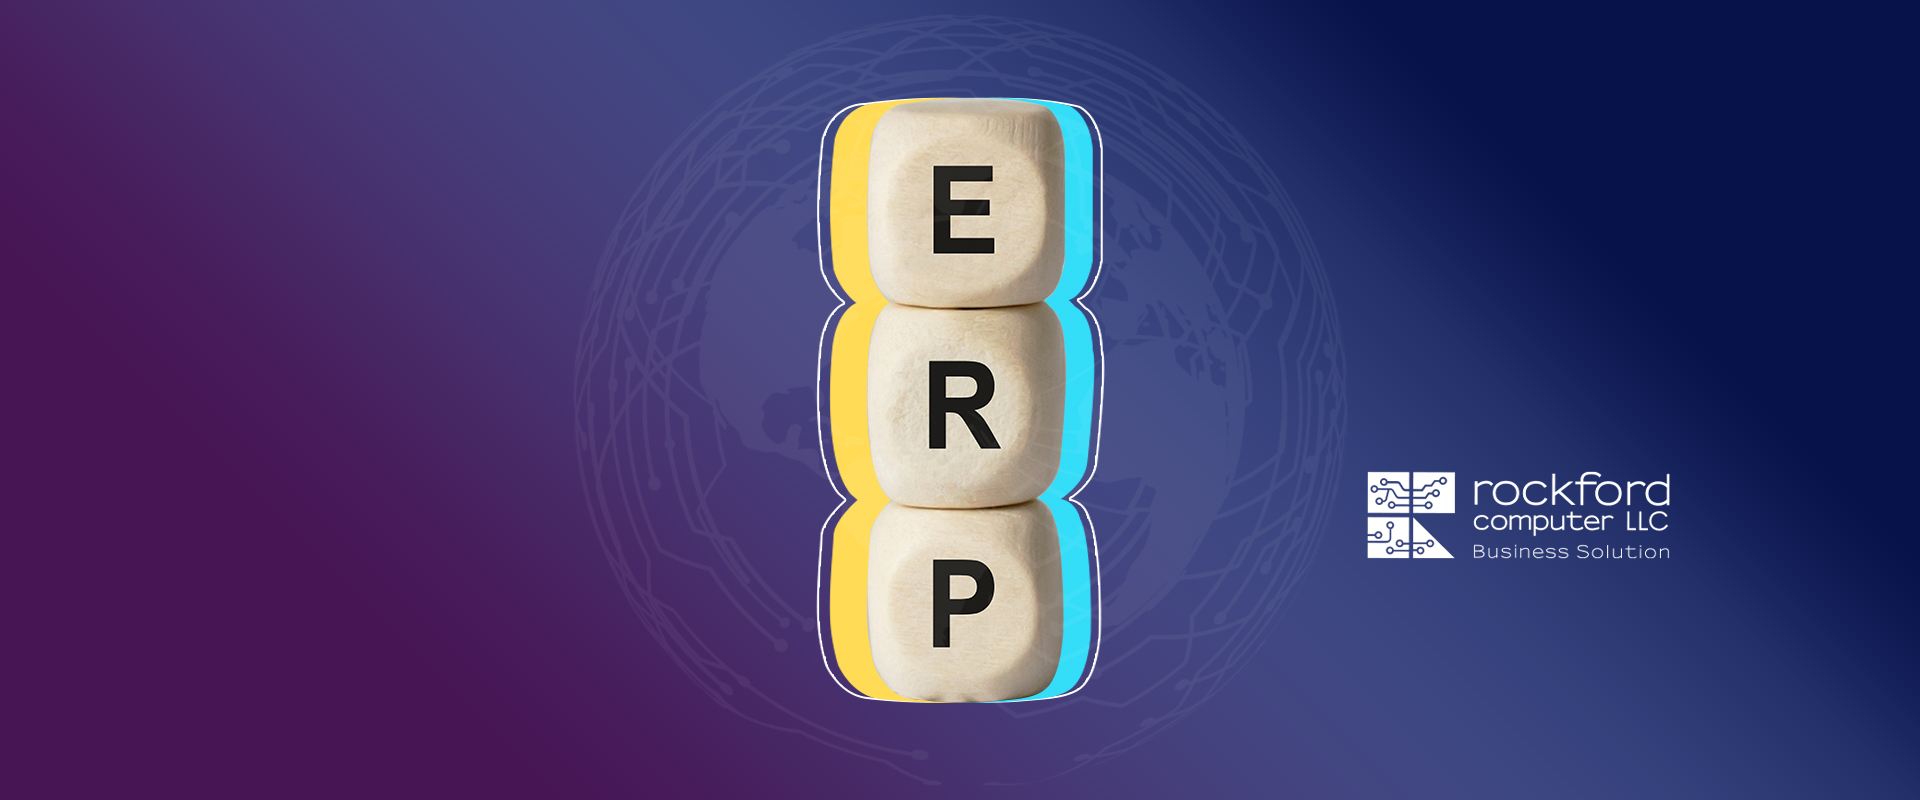 ERP Systems to Reduce Costs